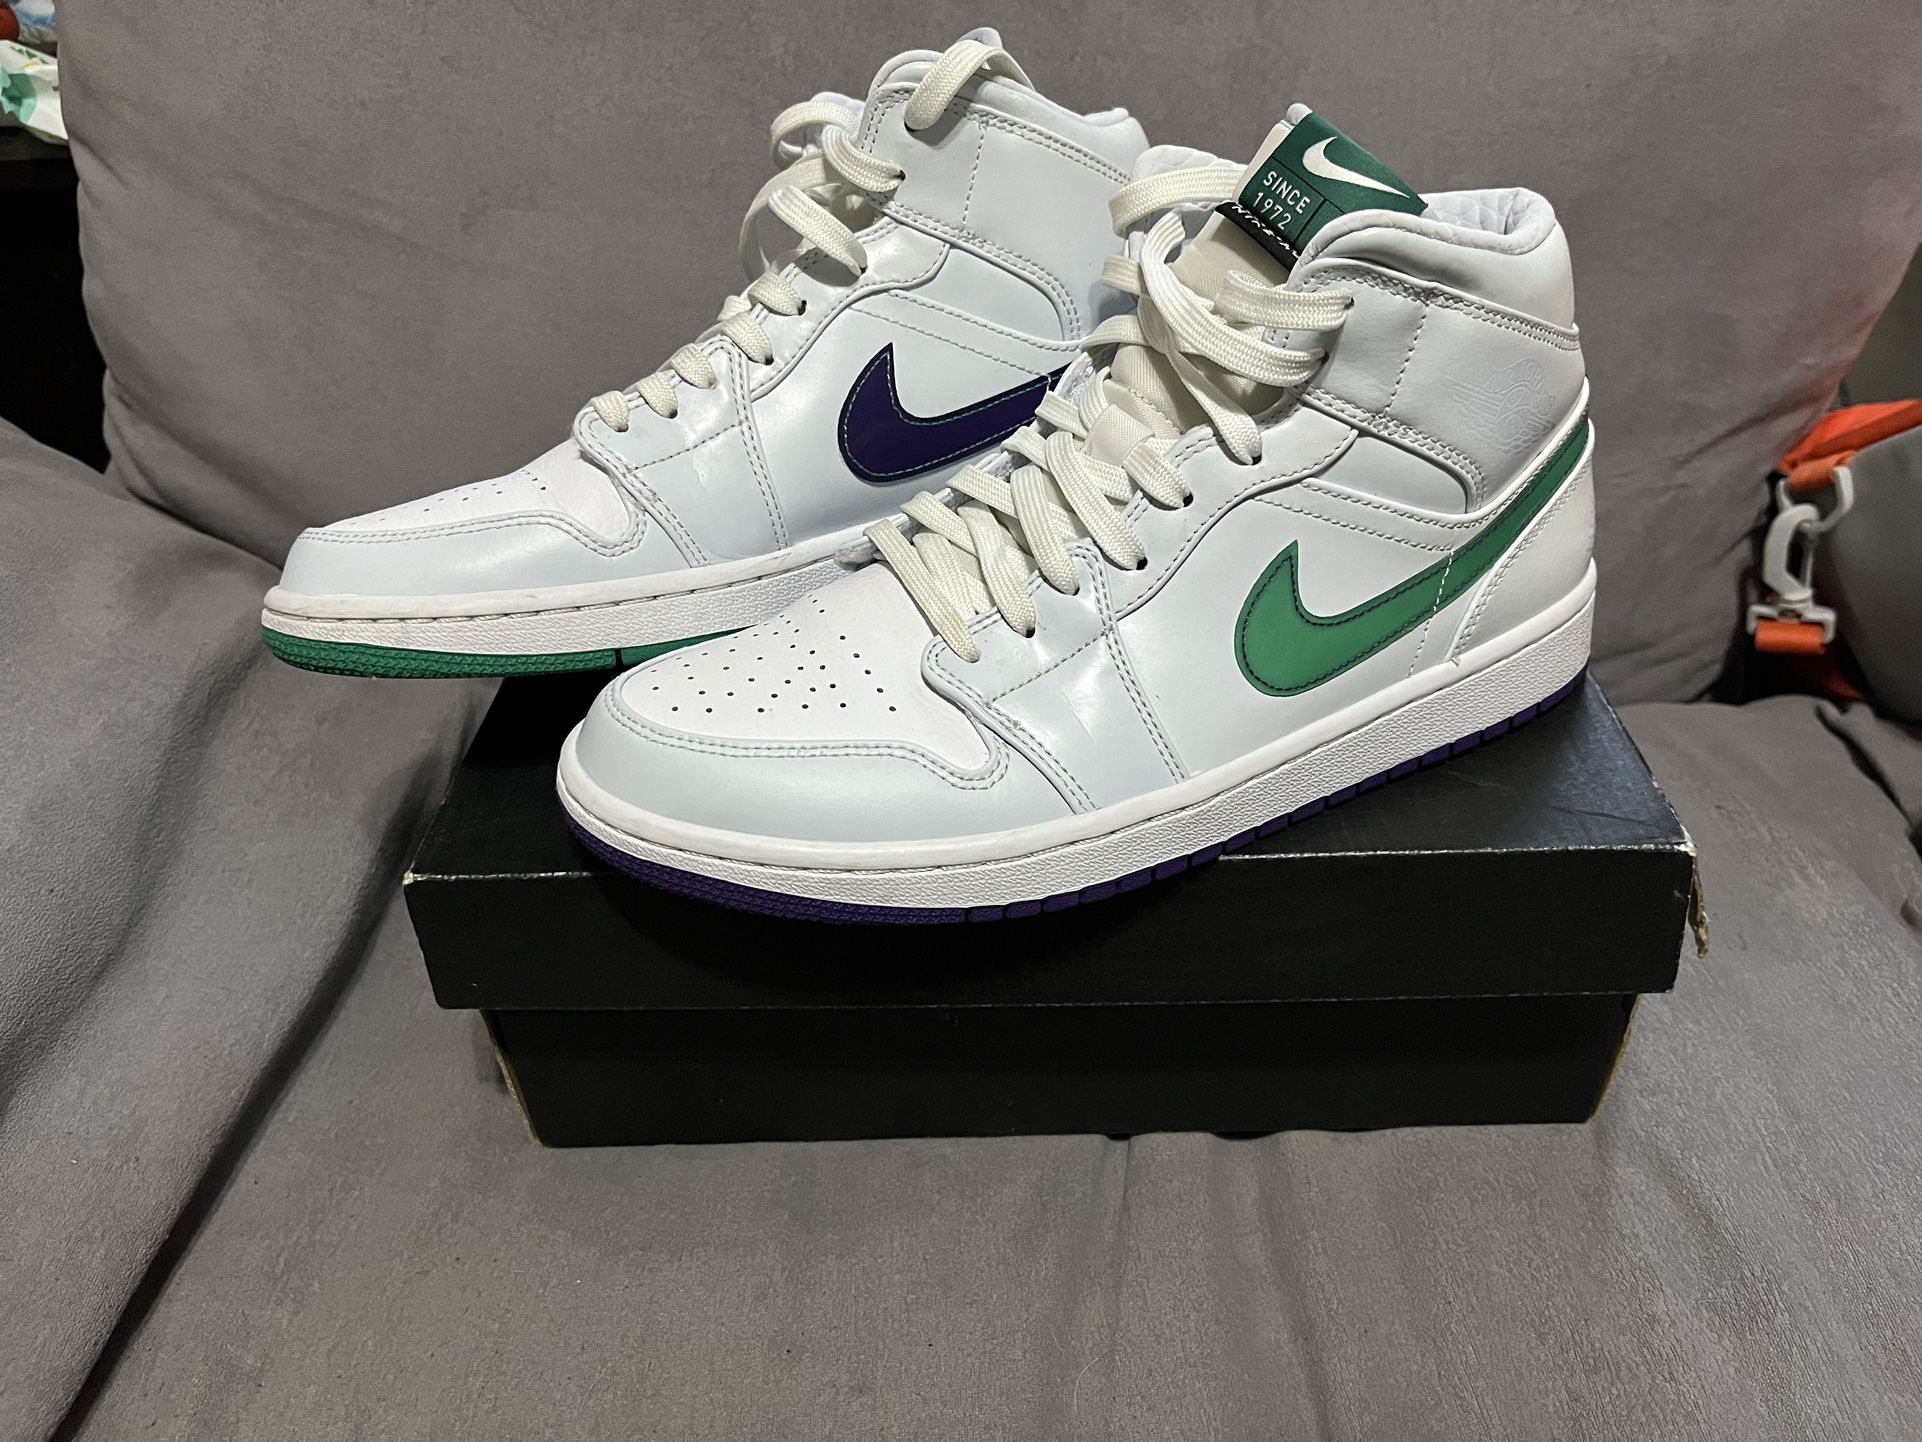 Air Jordan 1 Mid SE Luka Doncic size 9 for Sale in Los Angeles, CA - OfferUp